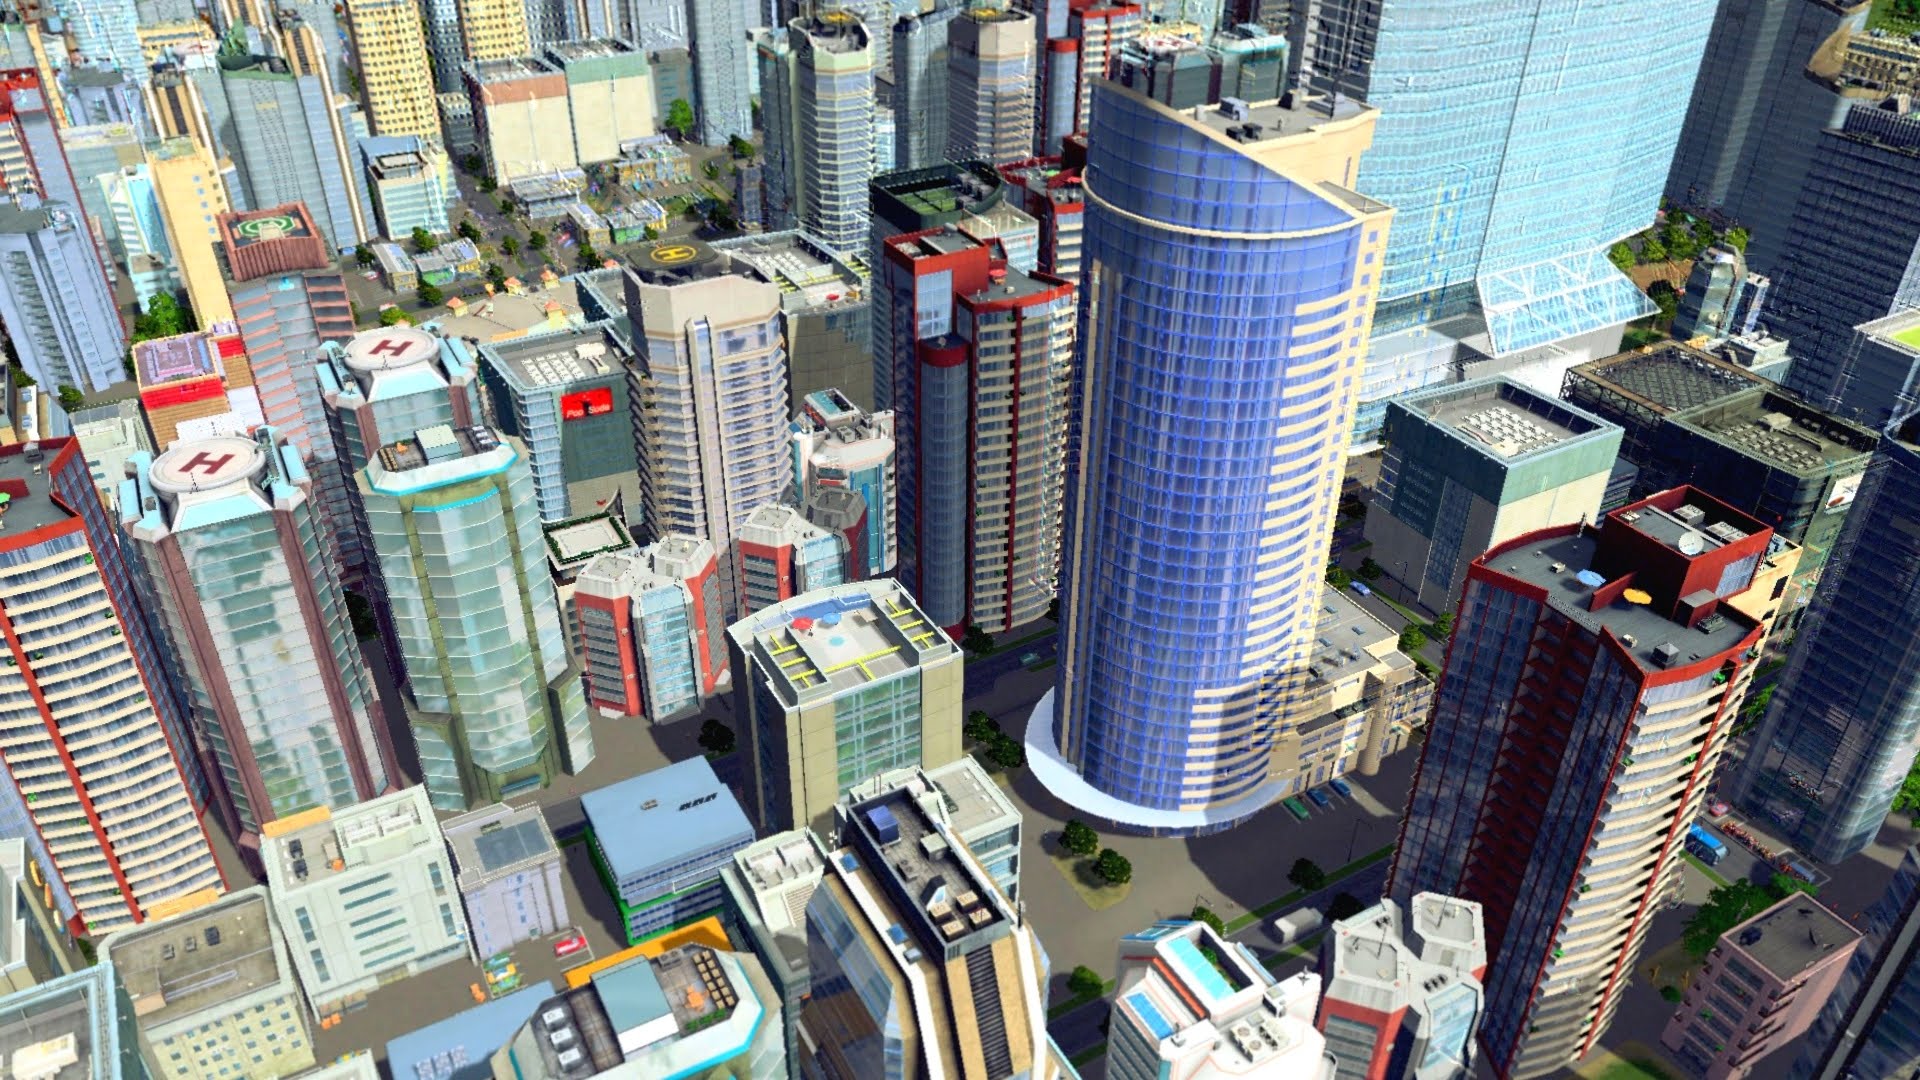 A screenshot of a scene from a video game called Cities: Skylines